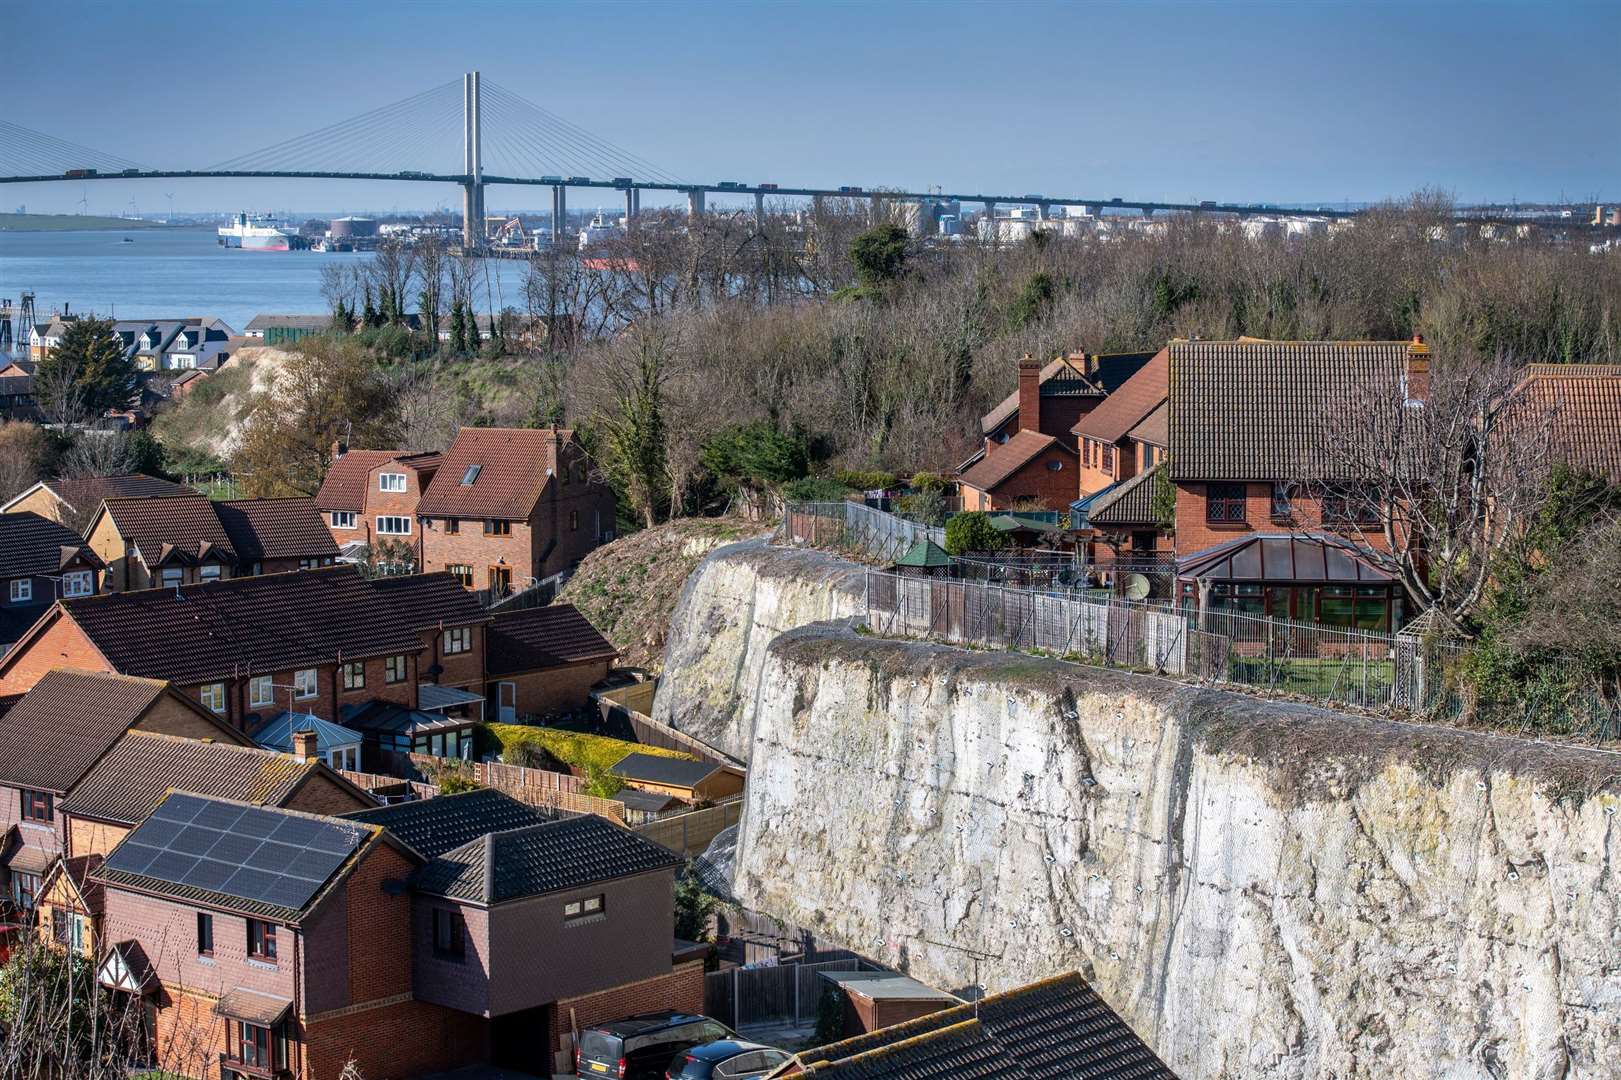 A £1 million project to protect homes at risk of damage from erosion and cliff collapsing in Eagles Road, Greenhithe has been completed. Picture: Clare Banks Photography